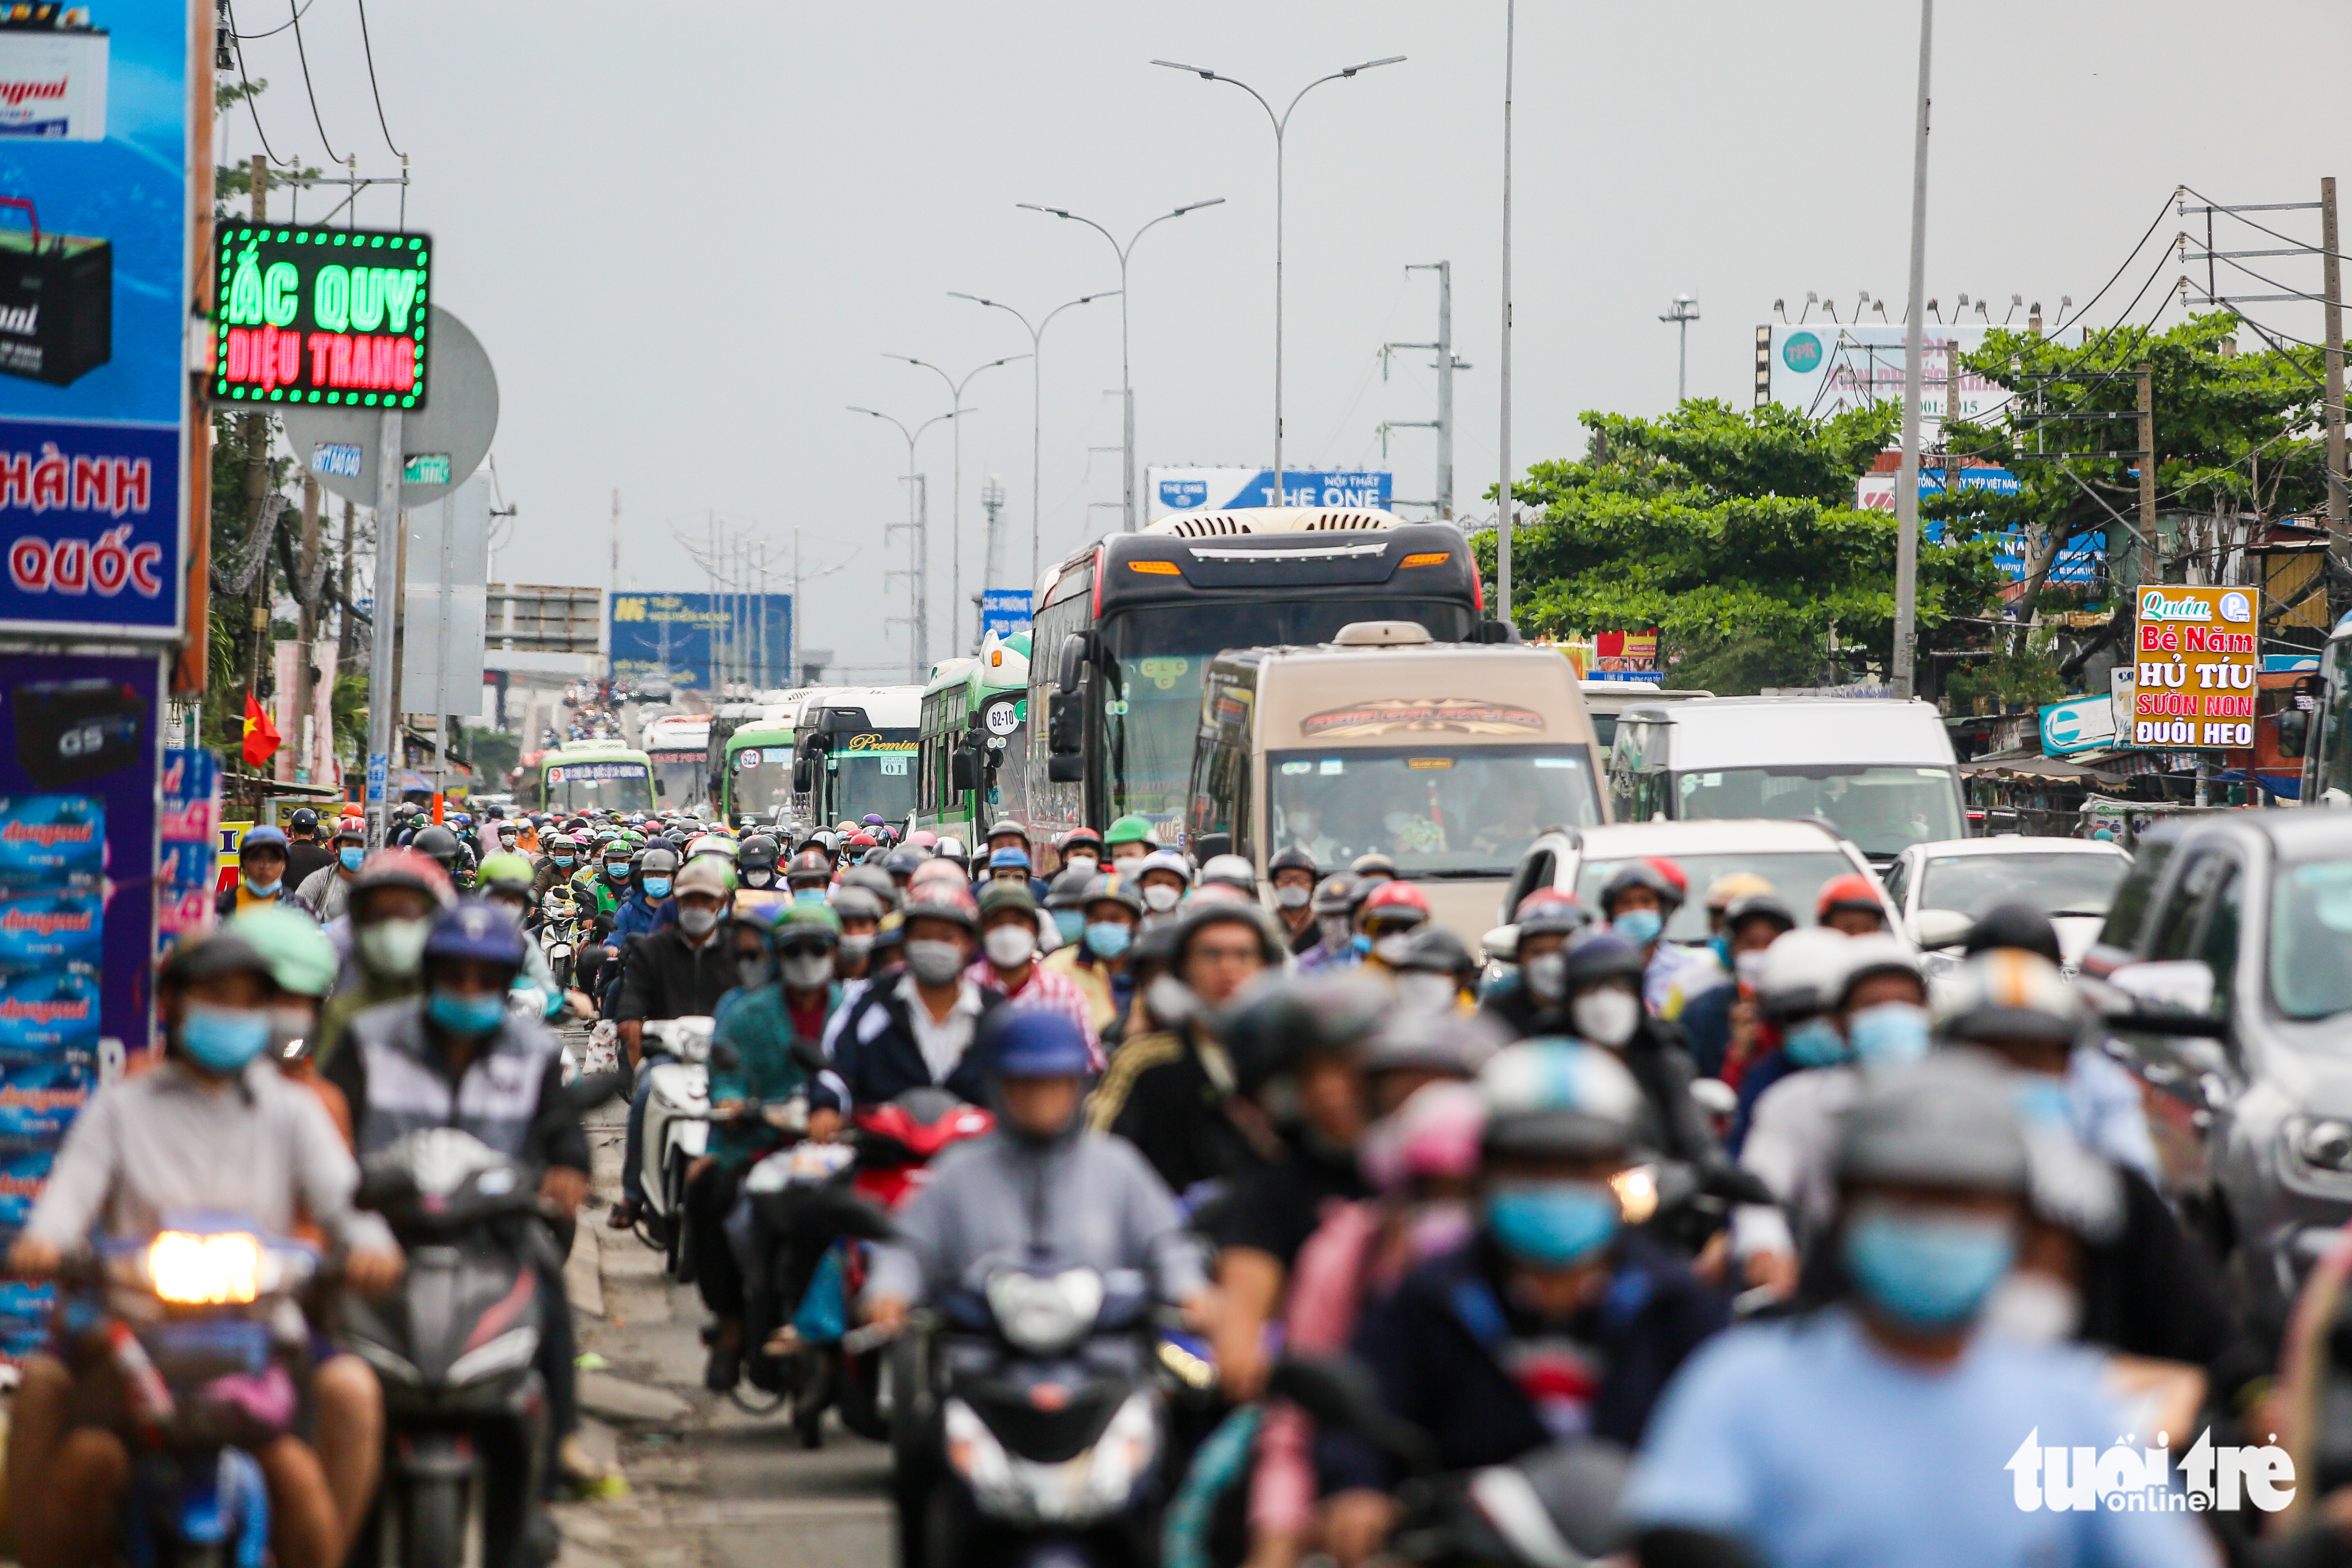 Hanoi, Ho Chi Minh City’s entrances congested as holiday weekend ends